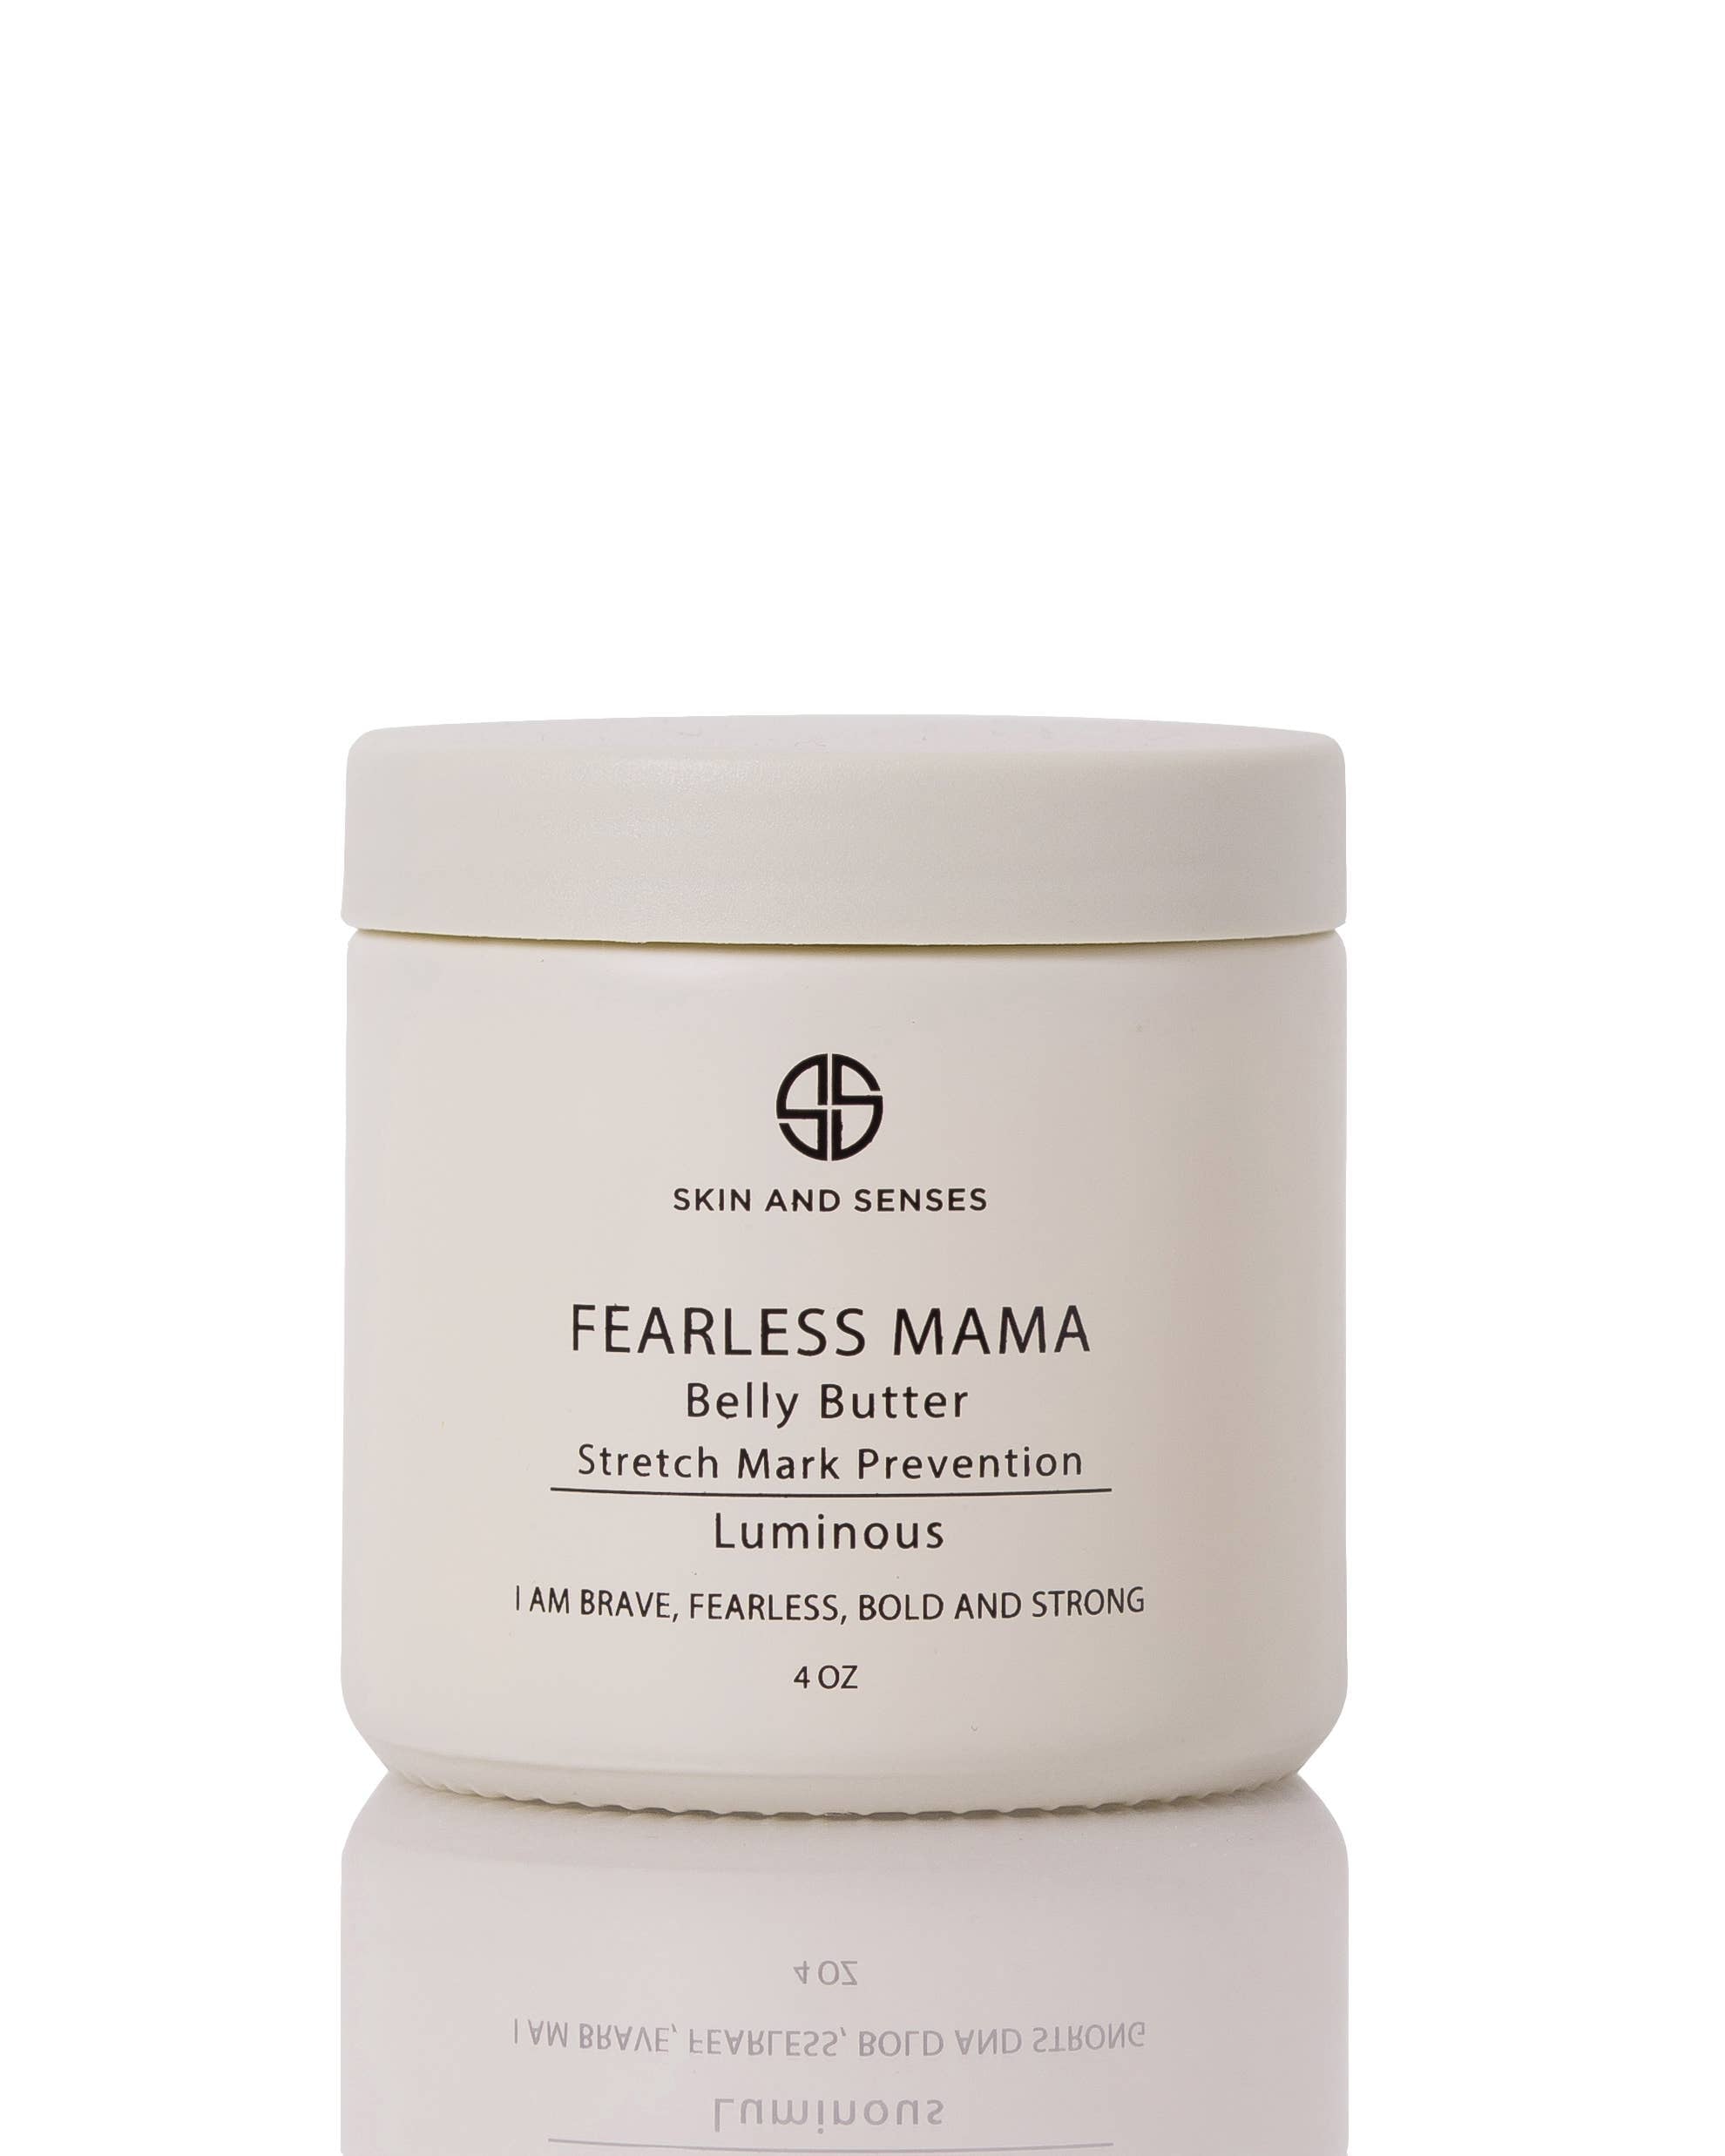 Fearless MaMa Belly Butter - Helps with Stretch Mark Prevent